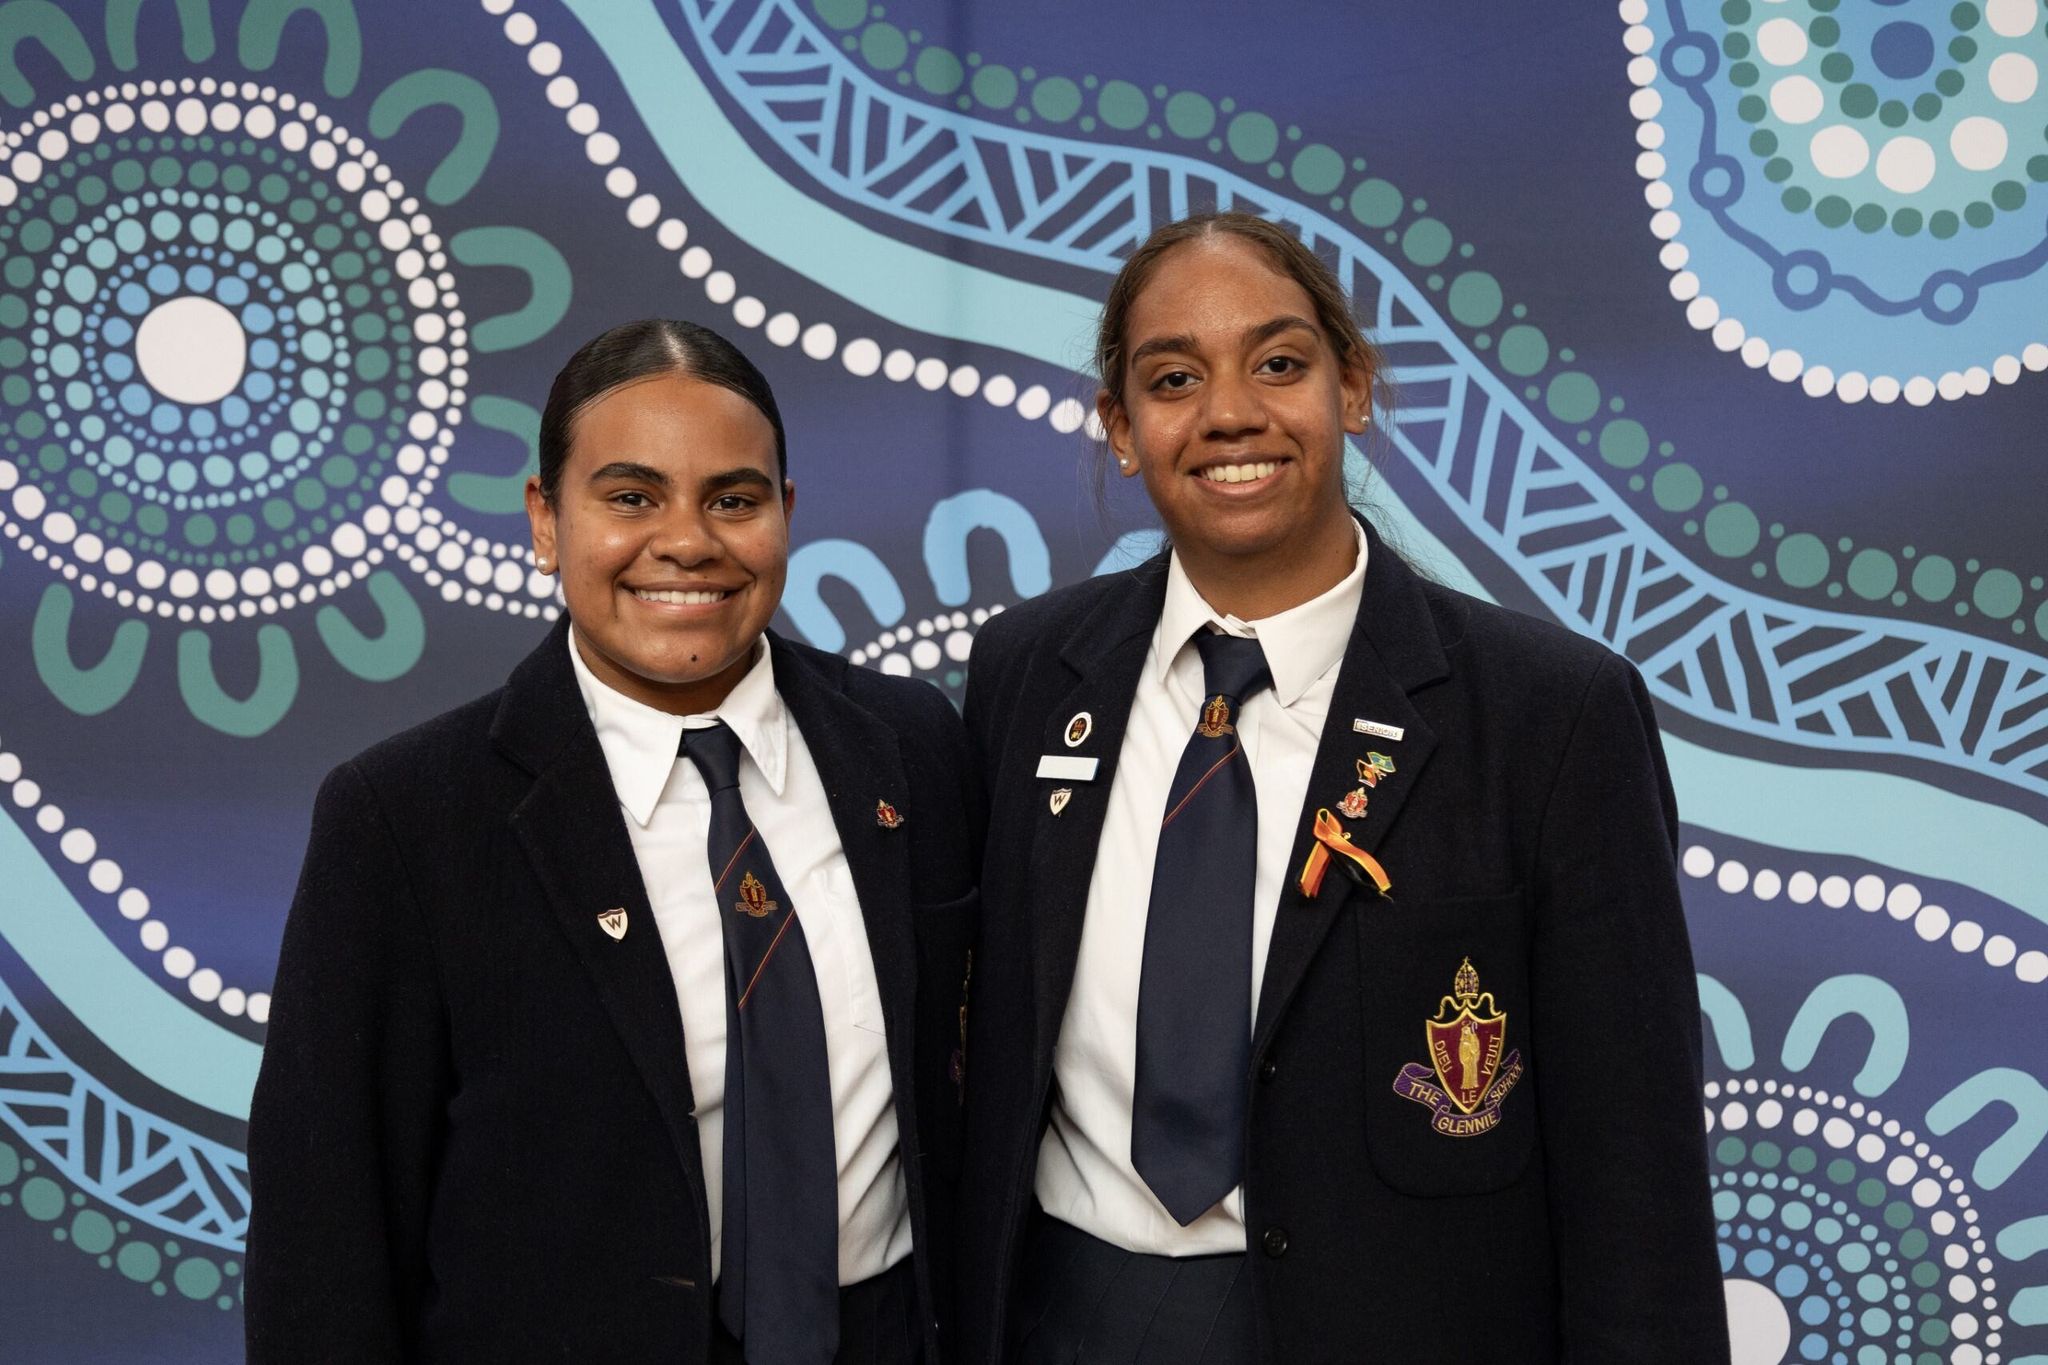 Two Yalari scholars in their school uniforms smiling against a blue background with aboriginal art patterns